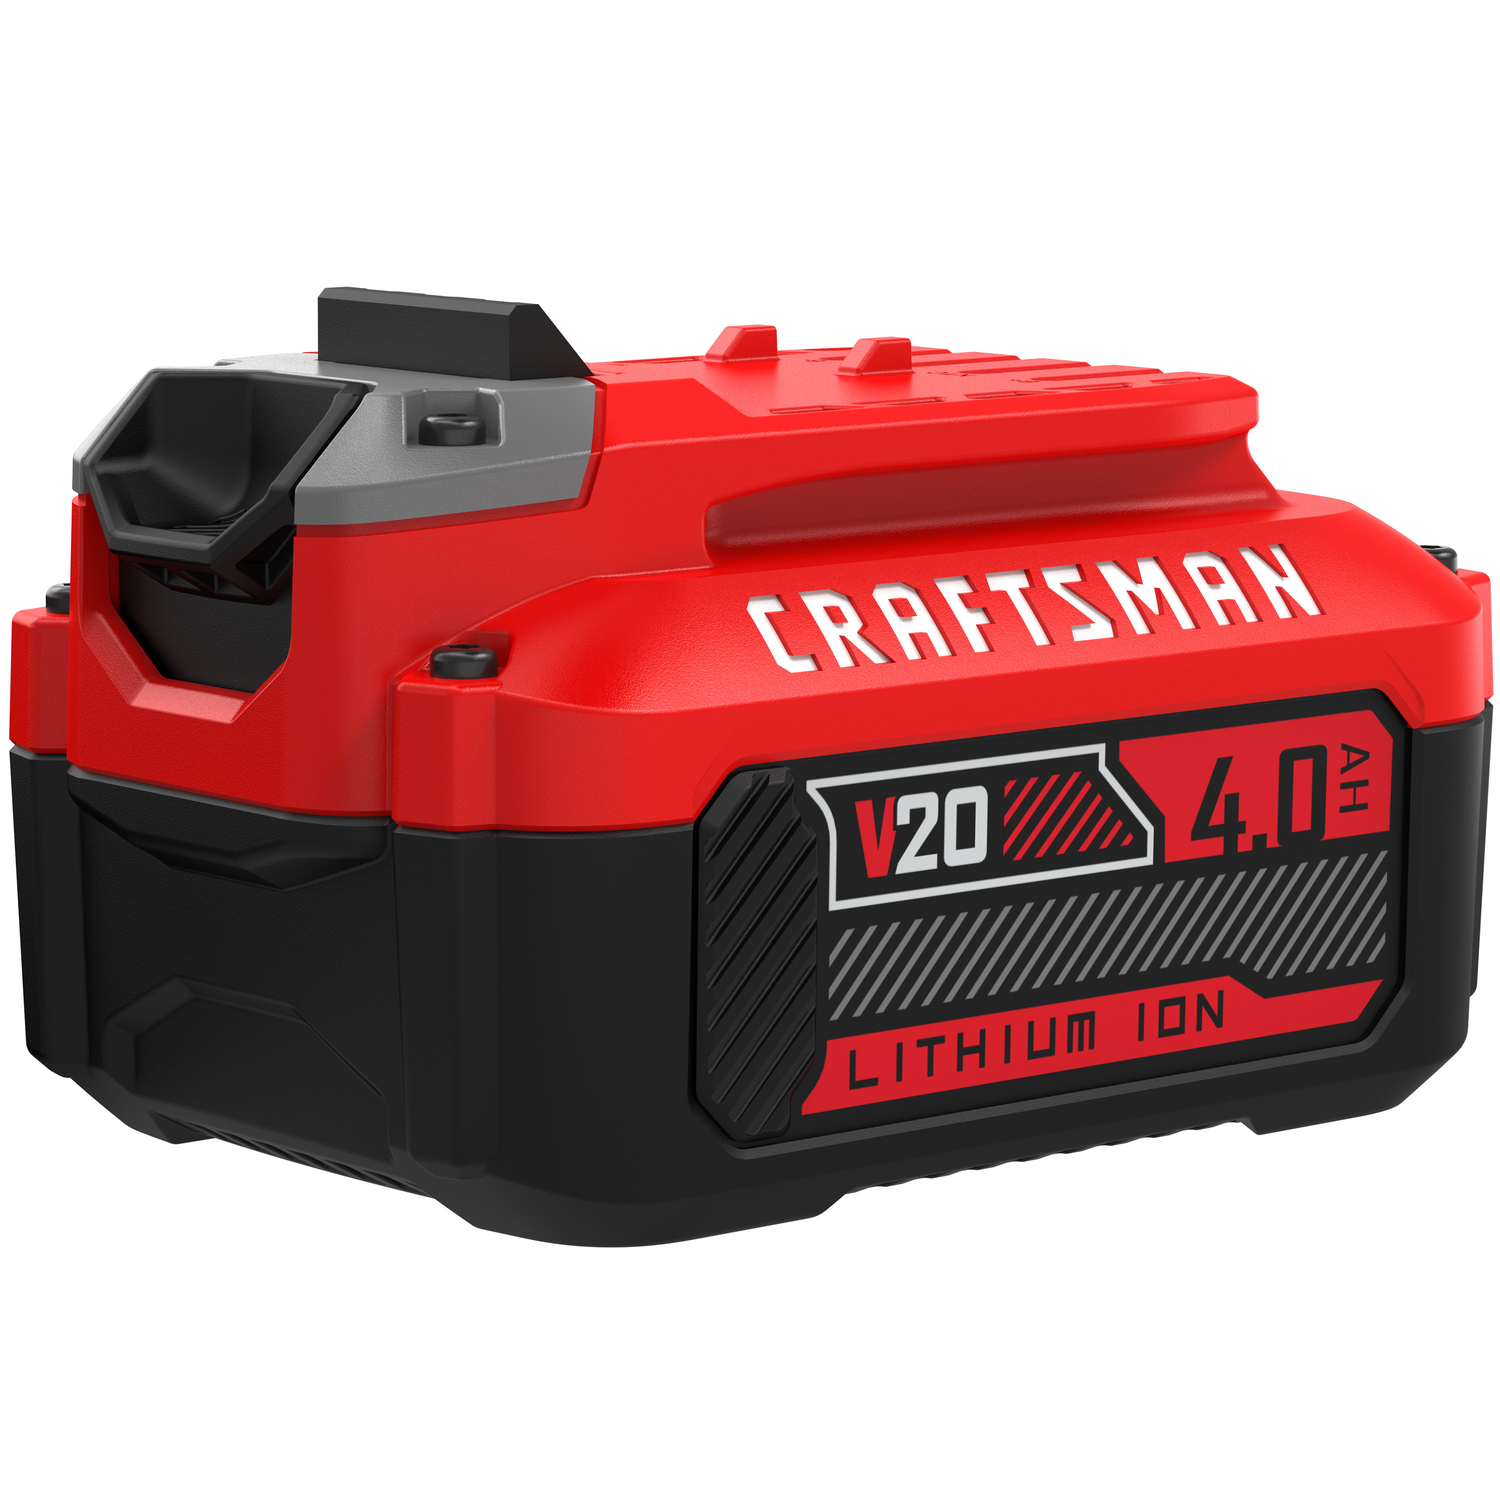 Craftsman 60 Volt Max 2 Ah Lithium Ion Battery for Outdoor Equipment